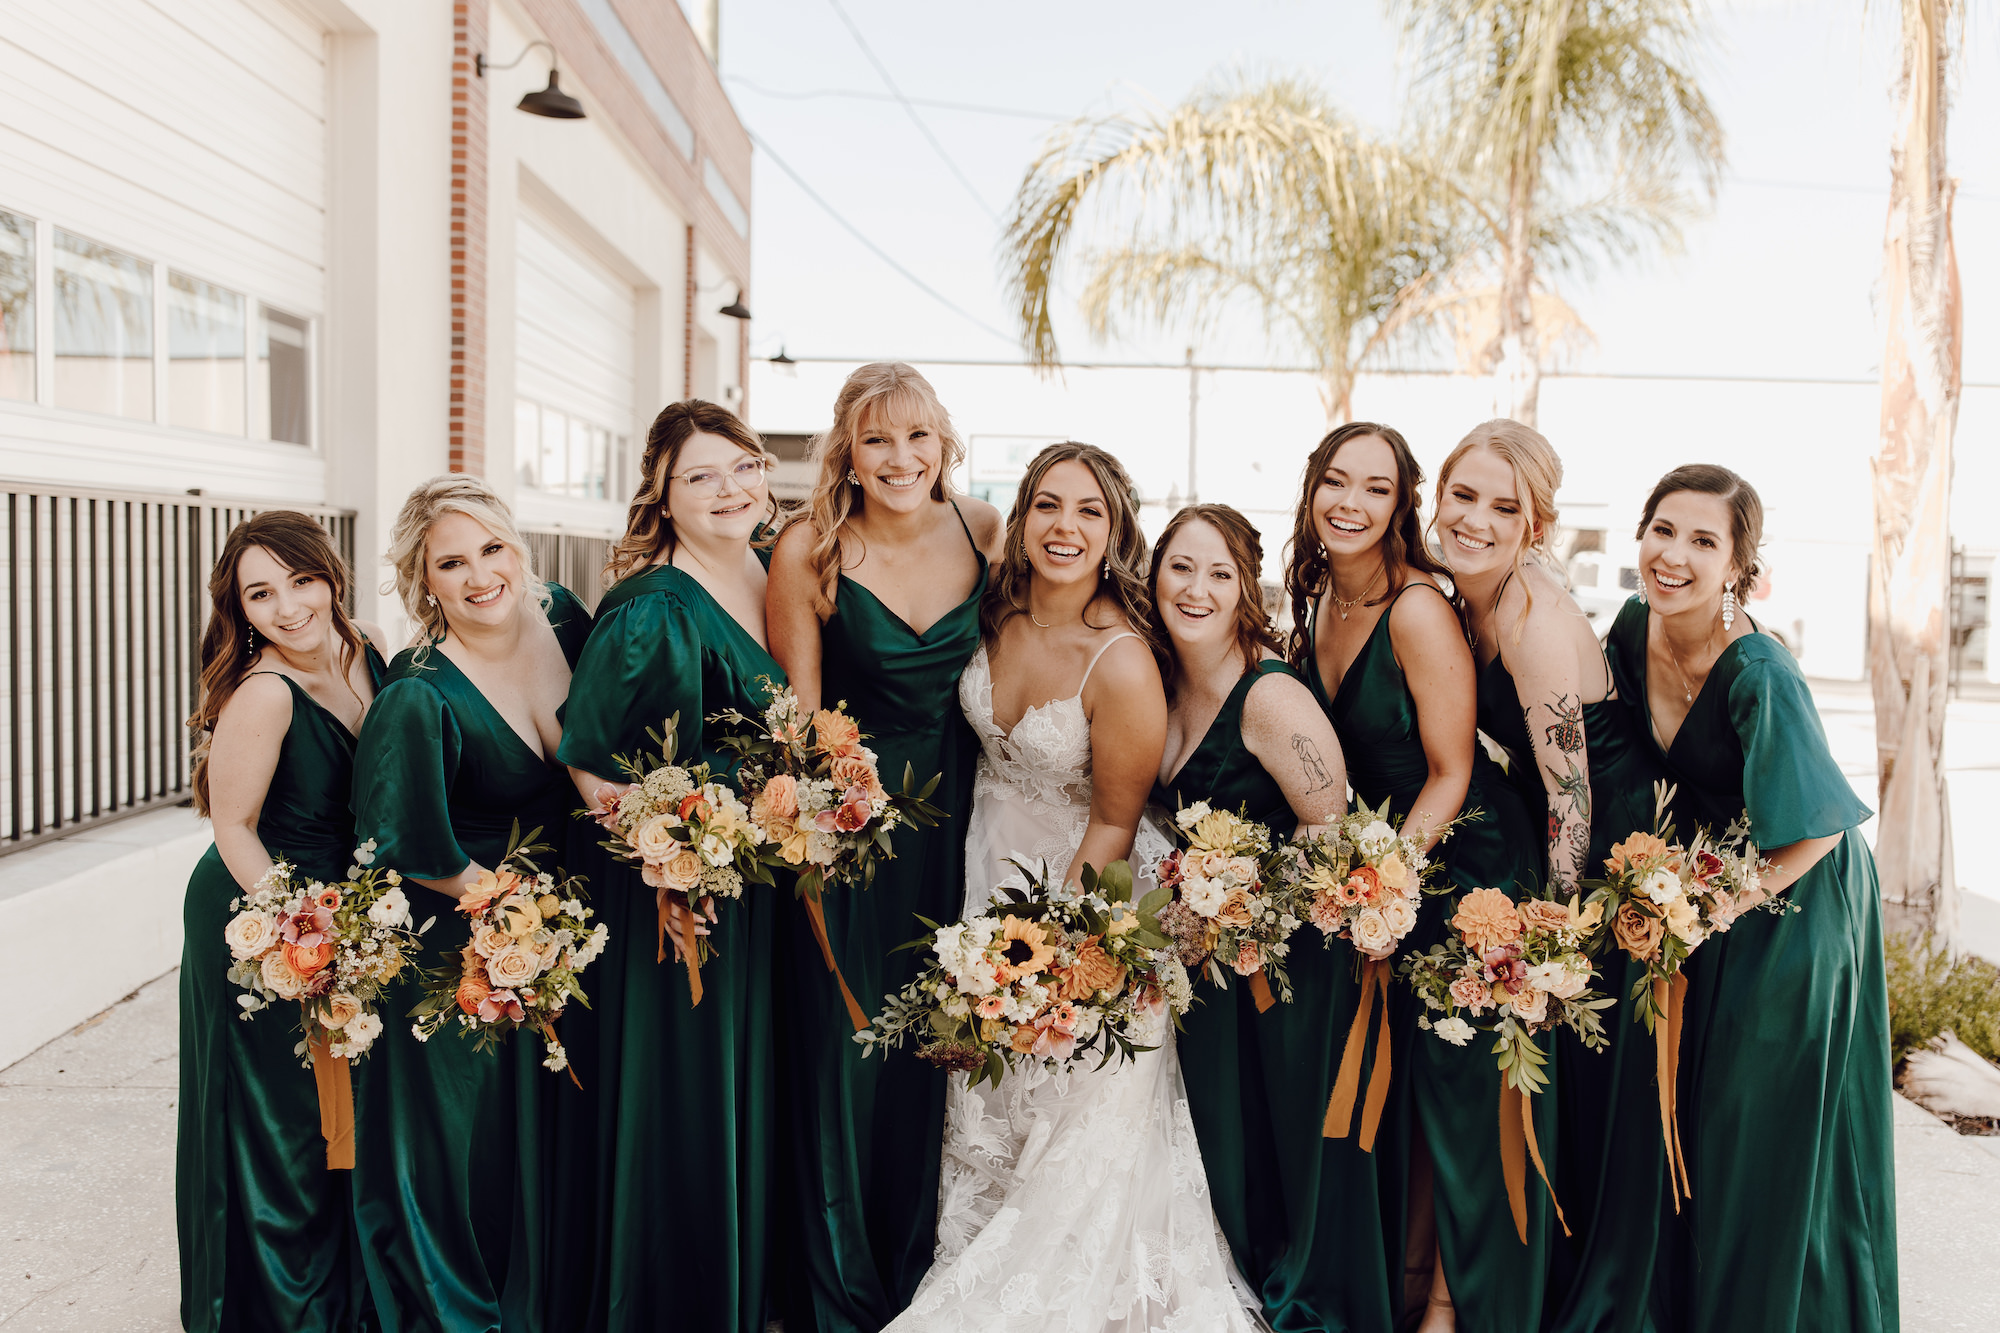 Boho Orange, White, Peach, Flowers, with Greenery and Ribbon Bouquet Inspiration | Emerald Green Jewel Toned Mismatched Bridesmaids Dress Ideas